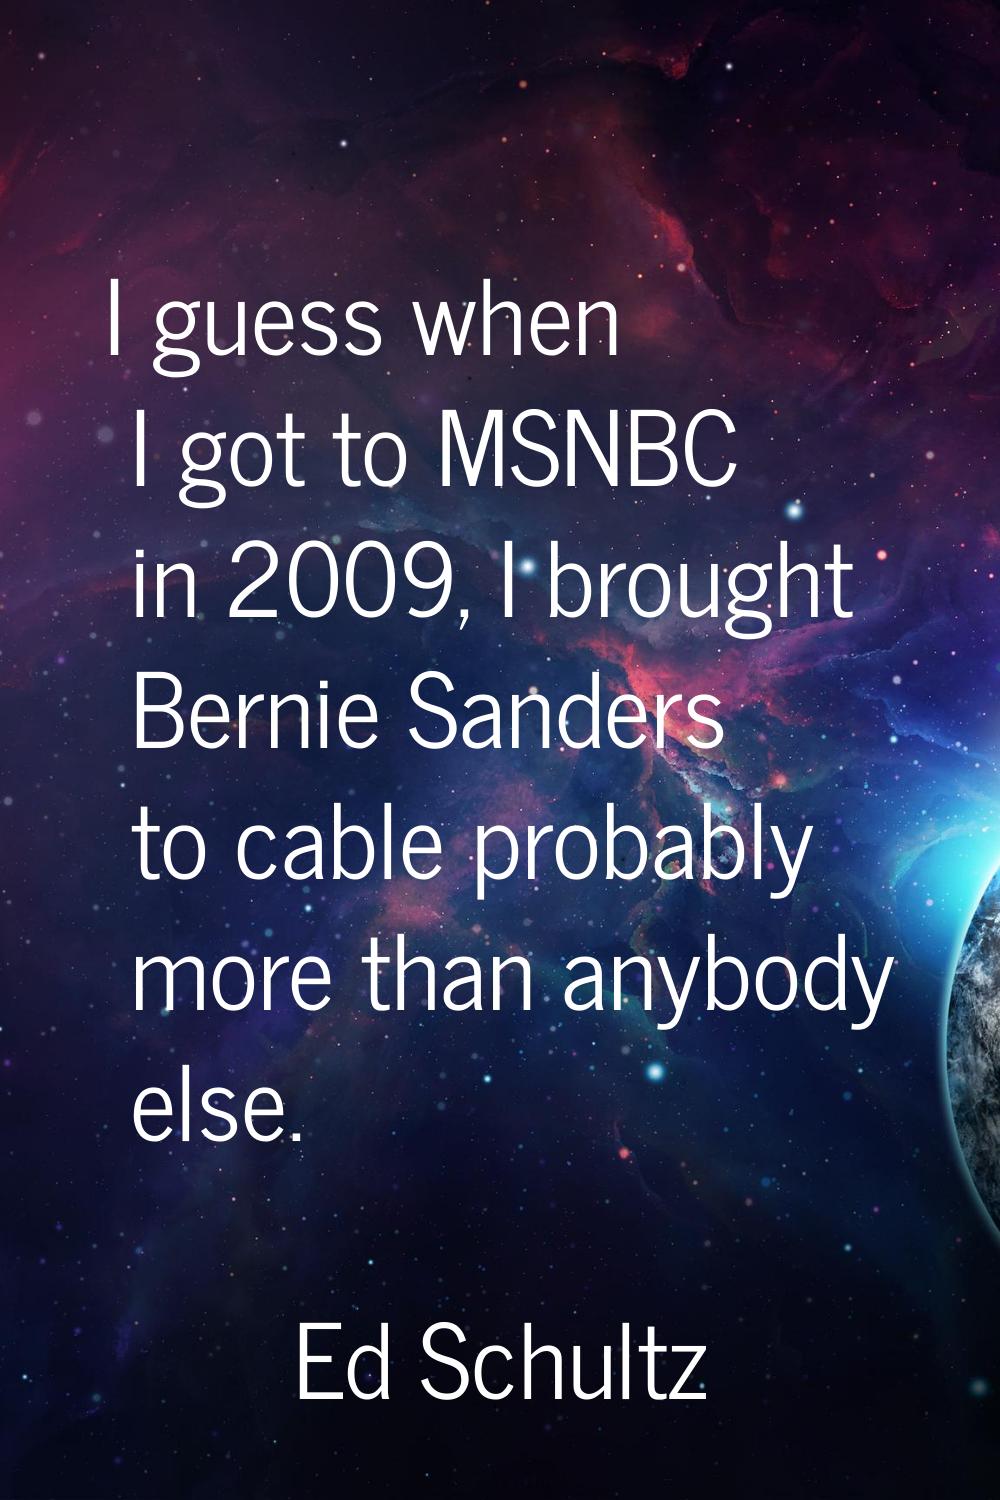 I guess when I got to MSNBC in 2009, I brought Bernie Sanders to cable probably more than anybody e